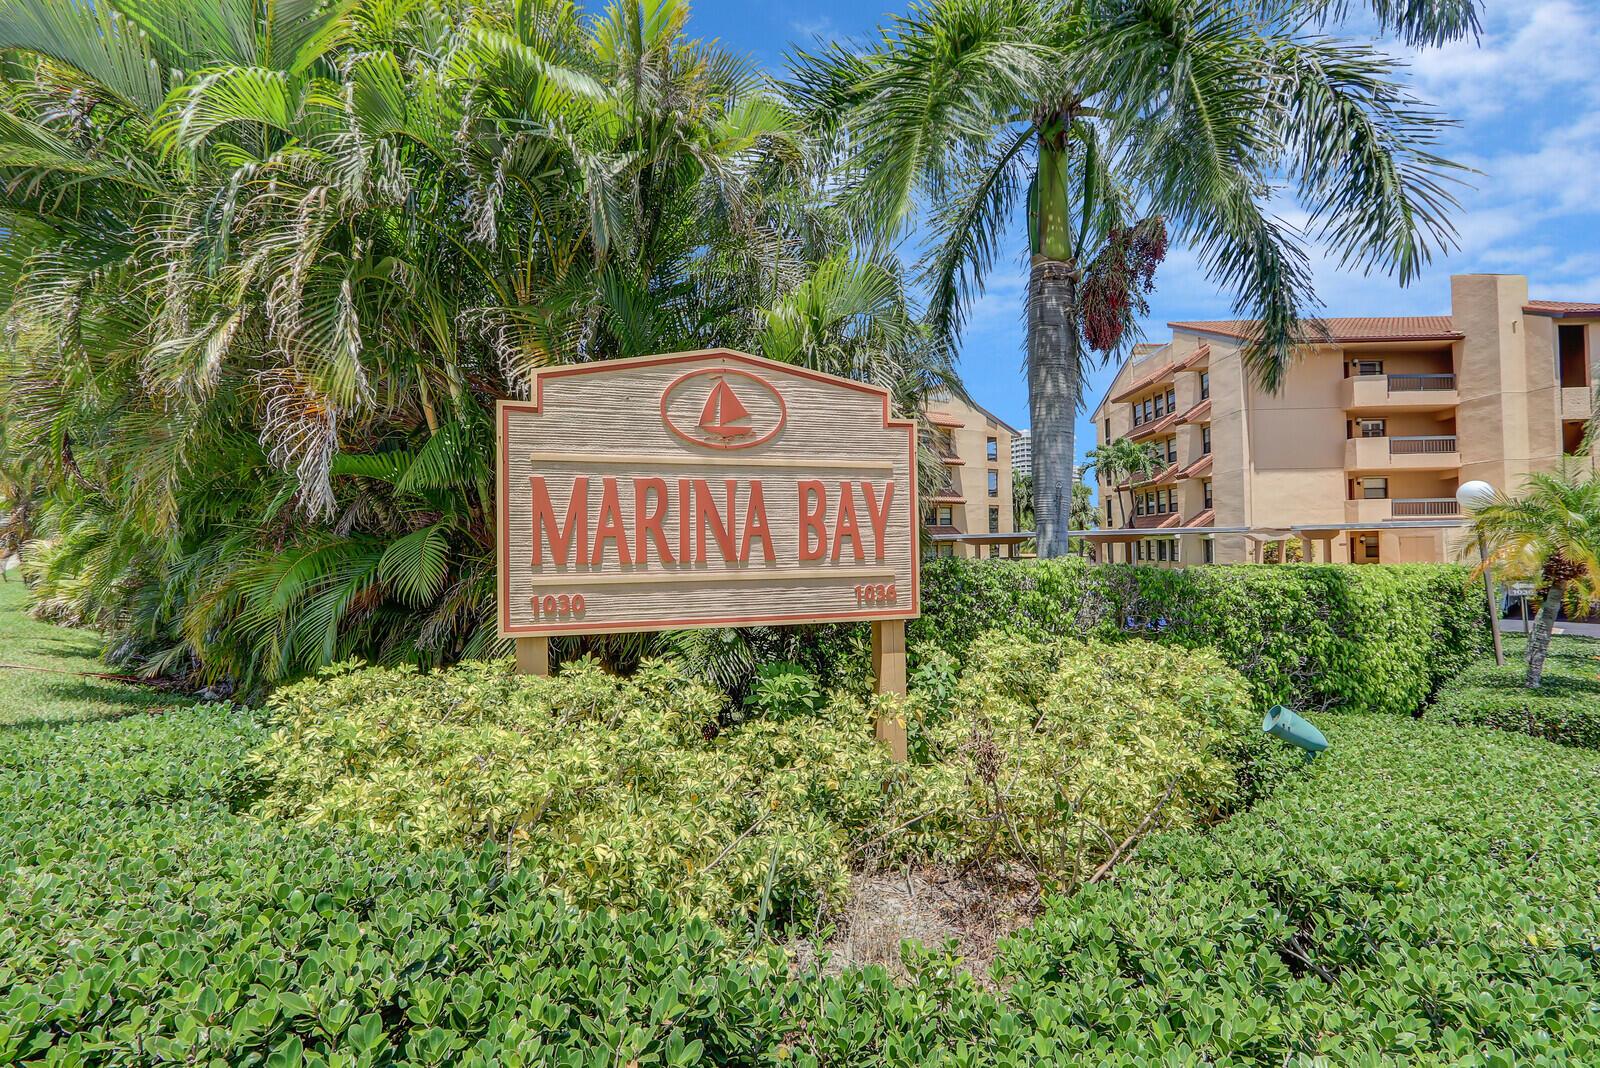 Stunning water & marina views from this beautiful 2bd/2ba third floor condo. This community offers a prime location with captivating marina views. Inside you'll find a spacious floor plan flooded with natural light. The large eat-in kitchen, complete with a full-size washer and dryer, makes daily living convenient and enjoyable. Step out onto the oversized covered patio, complete with a storage closet, and savor the picturesque water and marina views. Parking is a breeze with your assigned covered parking spot, and there's ample guest parking available. Additional features of this fantastic property include extra storage space, accordion shutters for added peace of mind during storms, and the convenience of having everything you need close by.